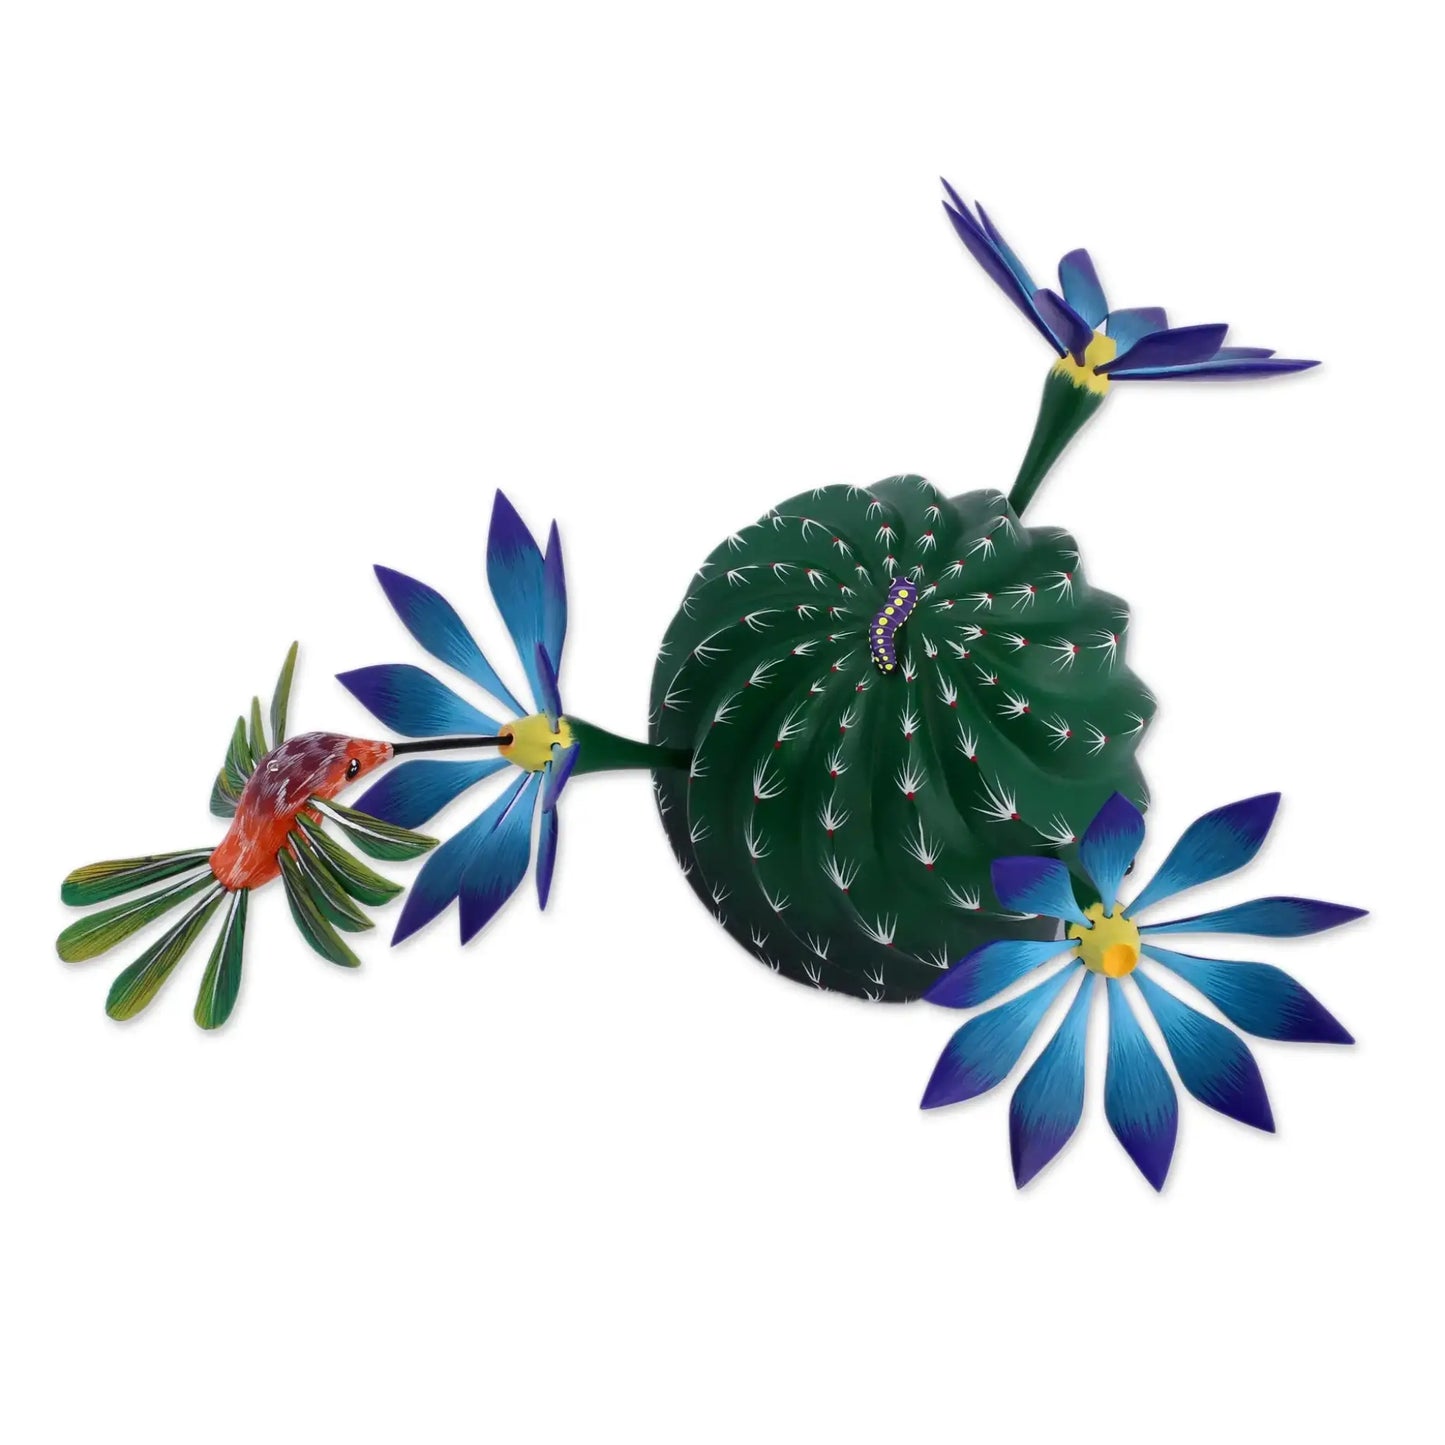 Nature and Happiness - Hand-Painted Wood Alebrije Cactus